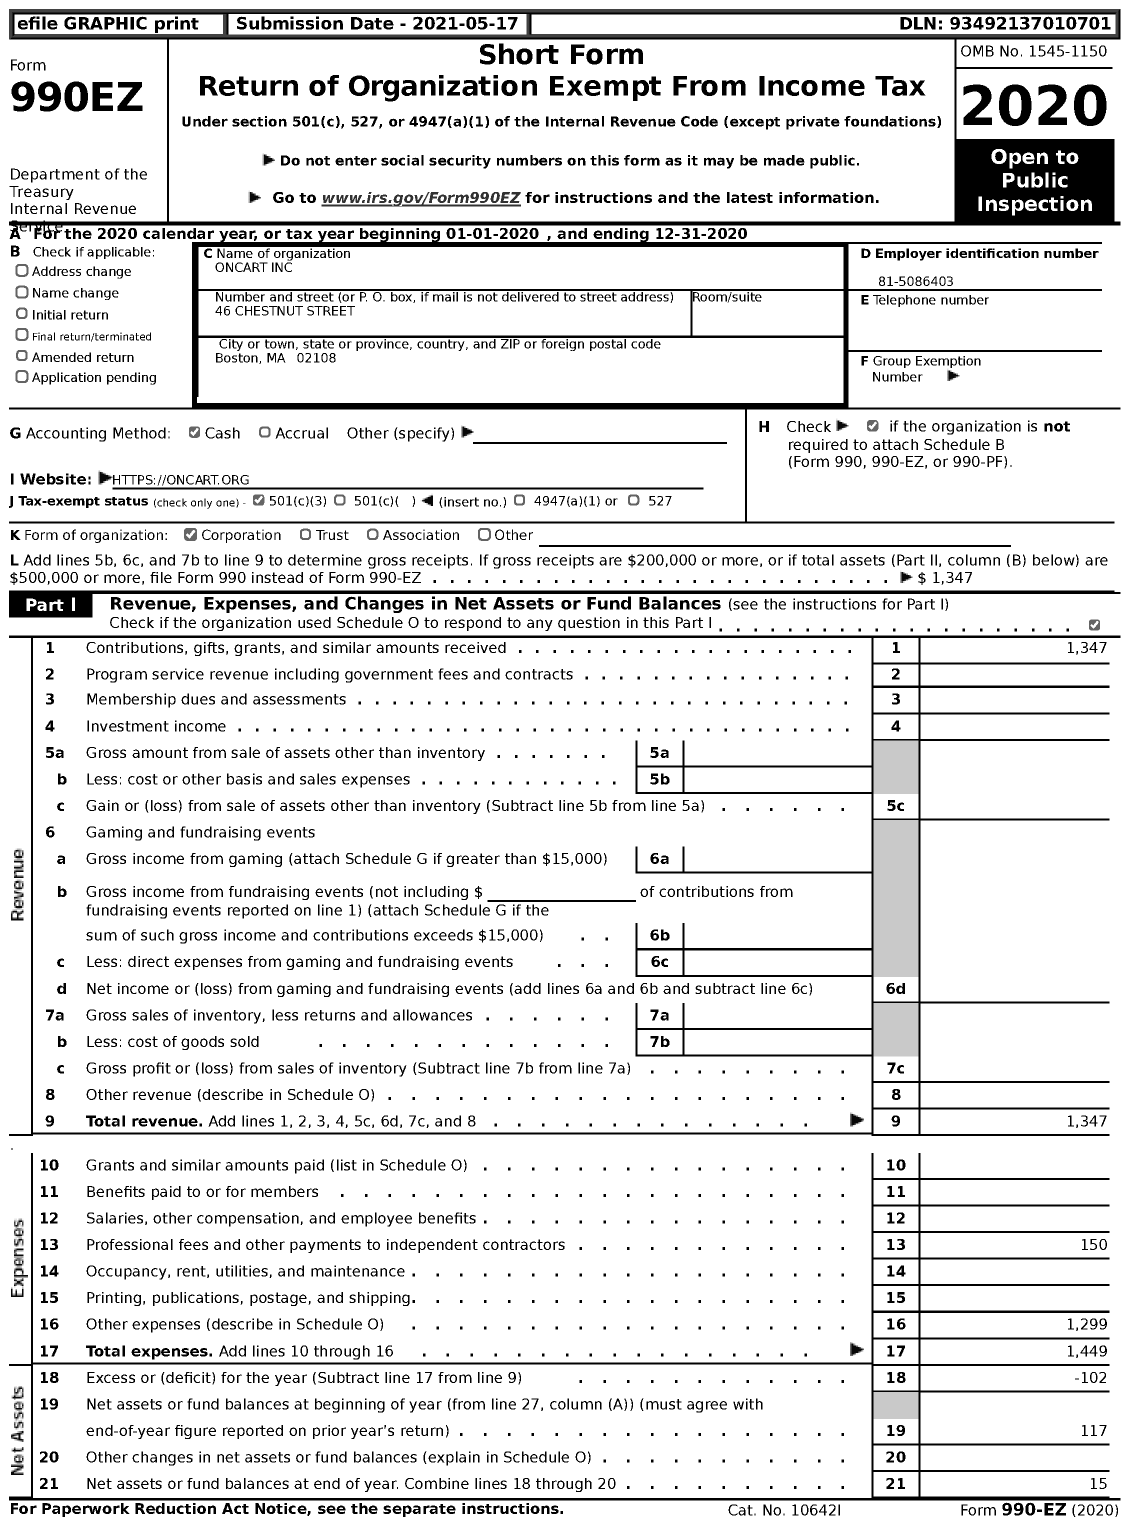 Image of first page of 2020 Form 990EZ for Oncart